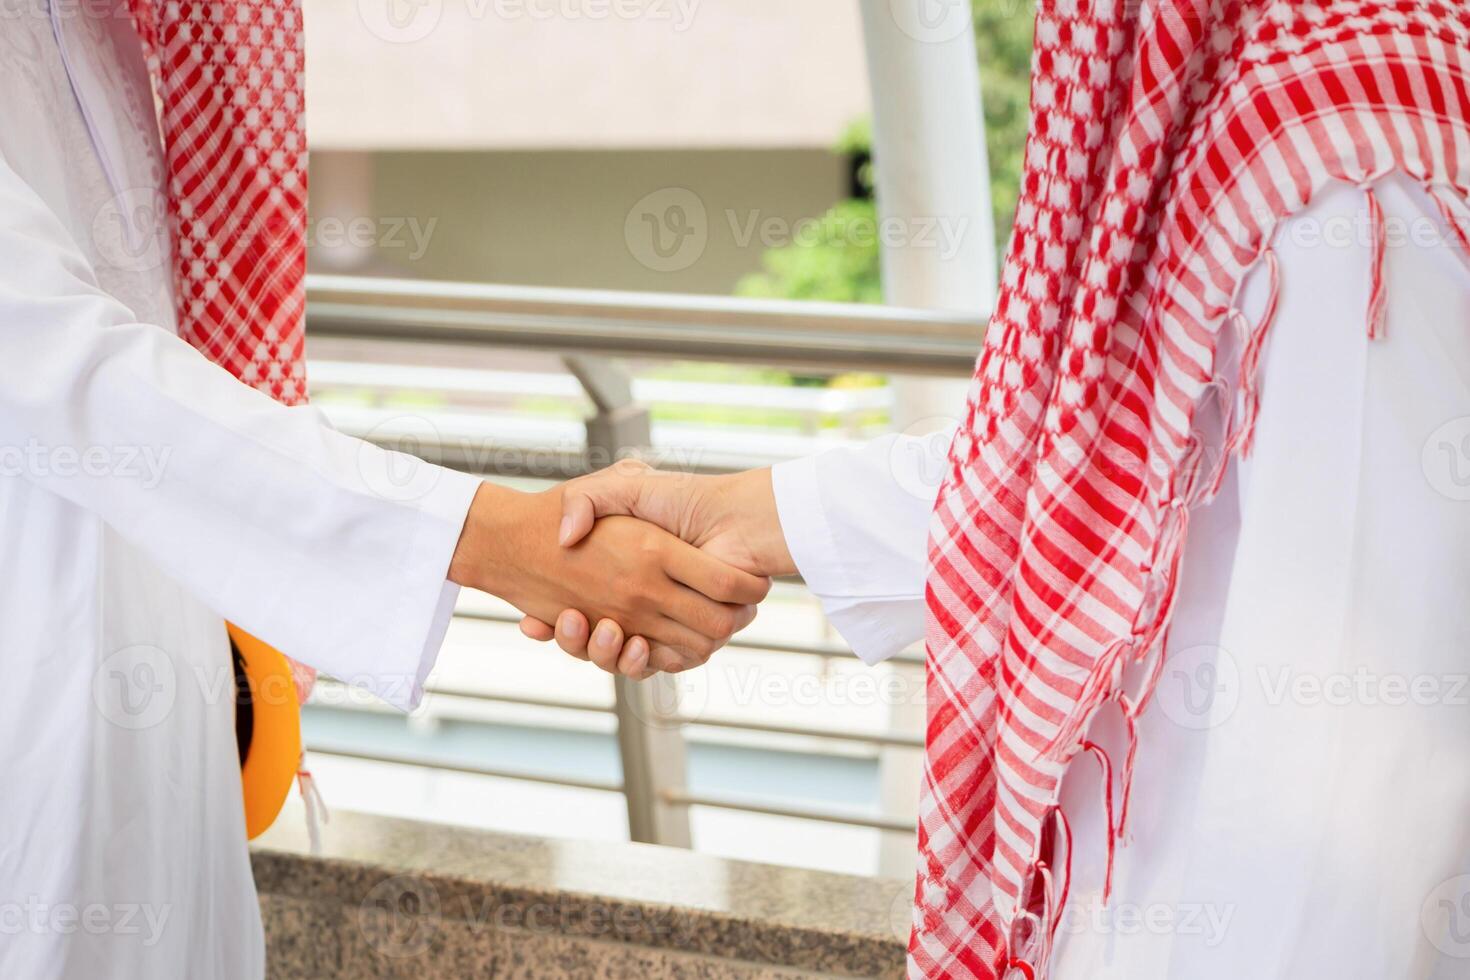 Arab Middle Eastern Businessman handshake, Business meeting with arab man and shaking hands in greetings photo